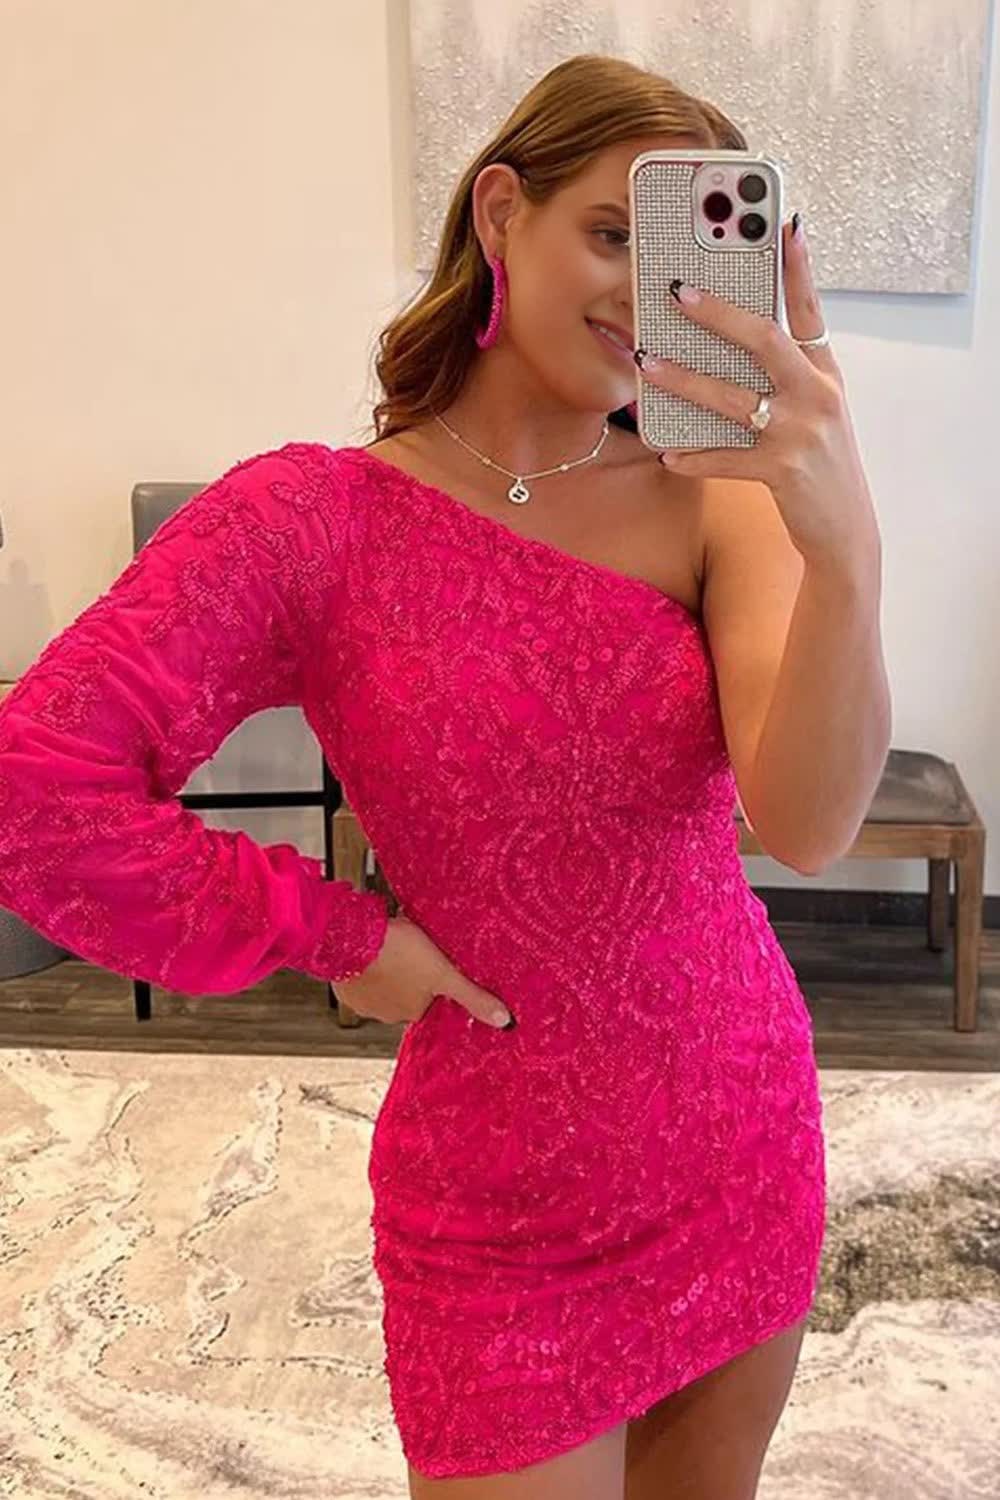 Hot Pink Beaded Sequins One Shoulder Tight Corset Homecoming Dress outfit, Hot Pink Beaded Sequins One Shoulder Tight Homecoming Dress